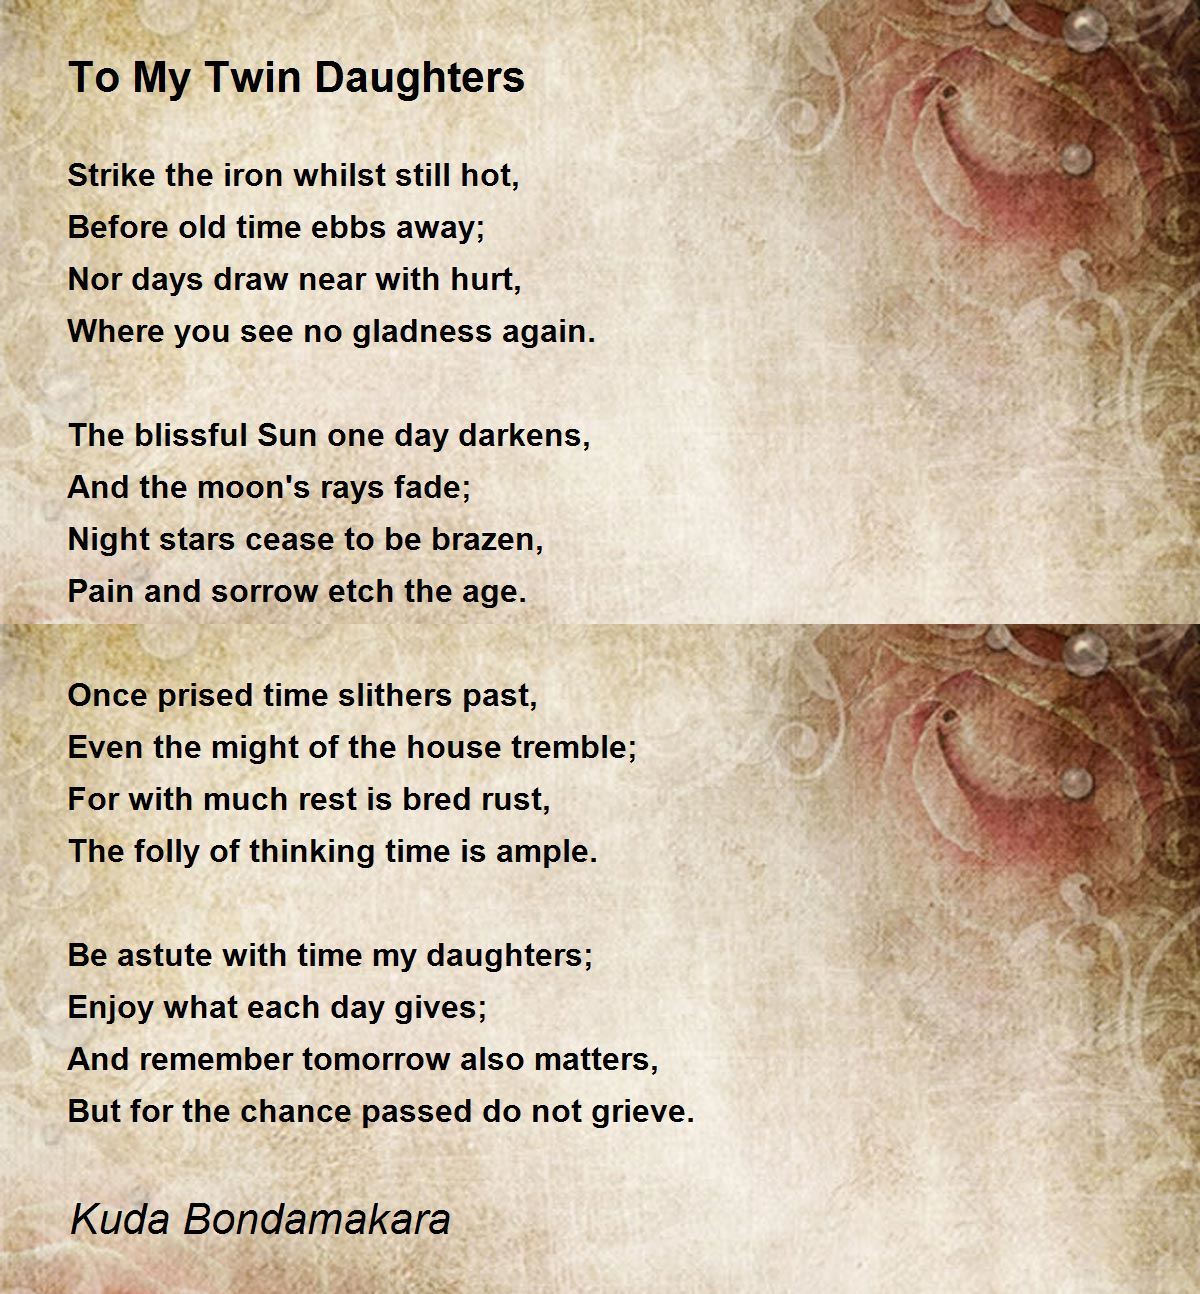 poetry essay on tomorrow's daughters